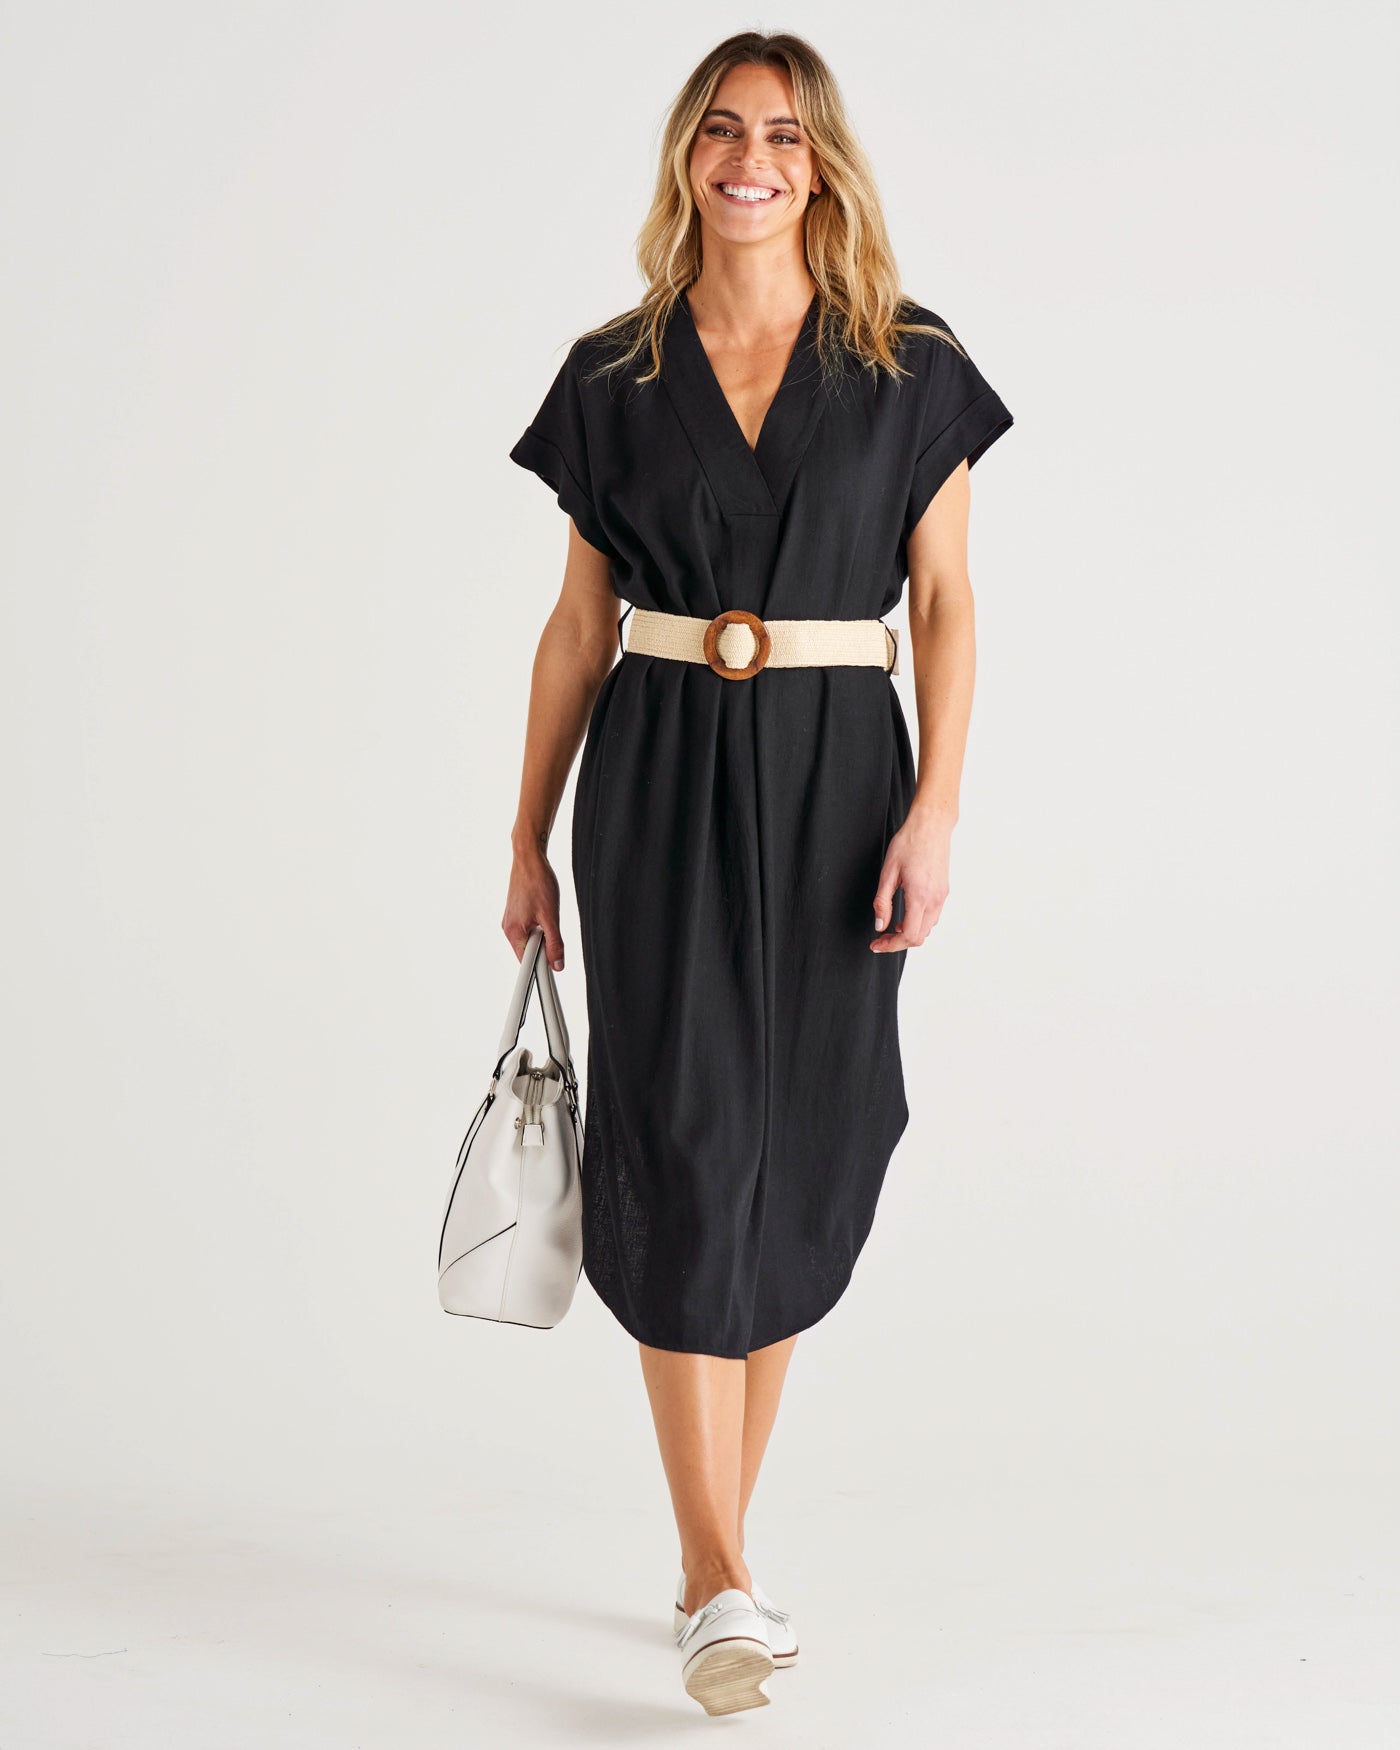 Effortless Dresses: Explore Betty Basics Collection of Everyday Dresses